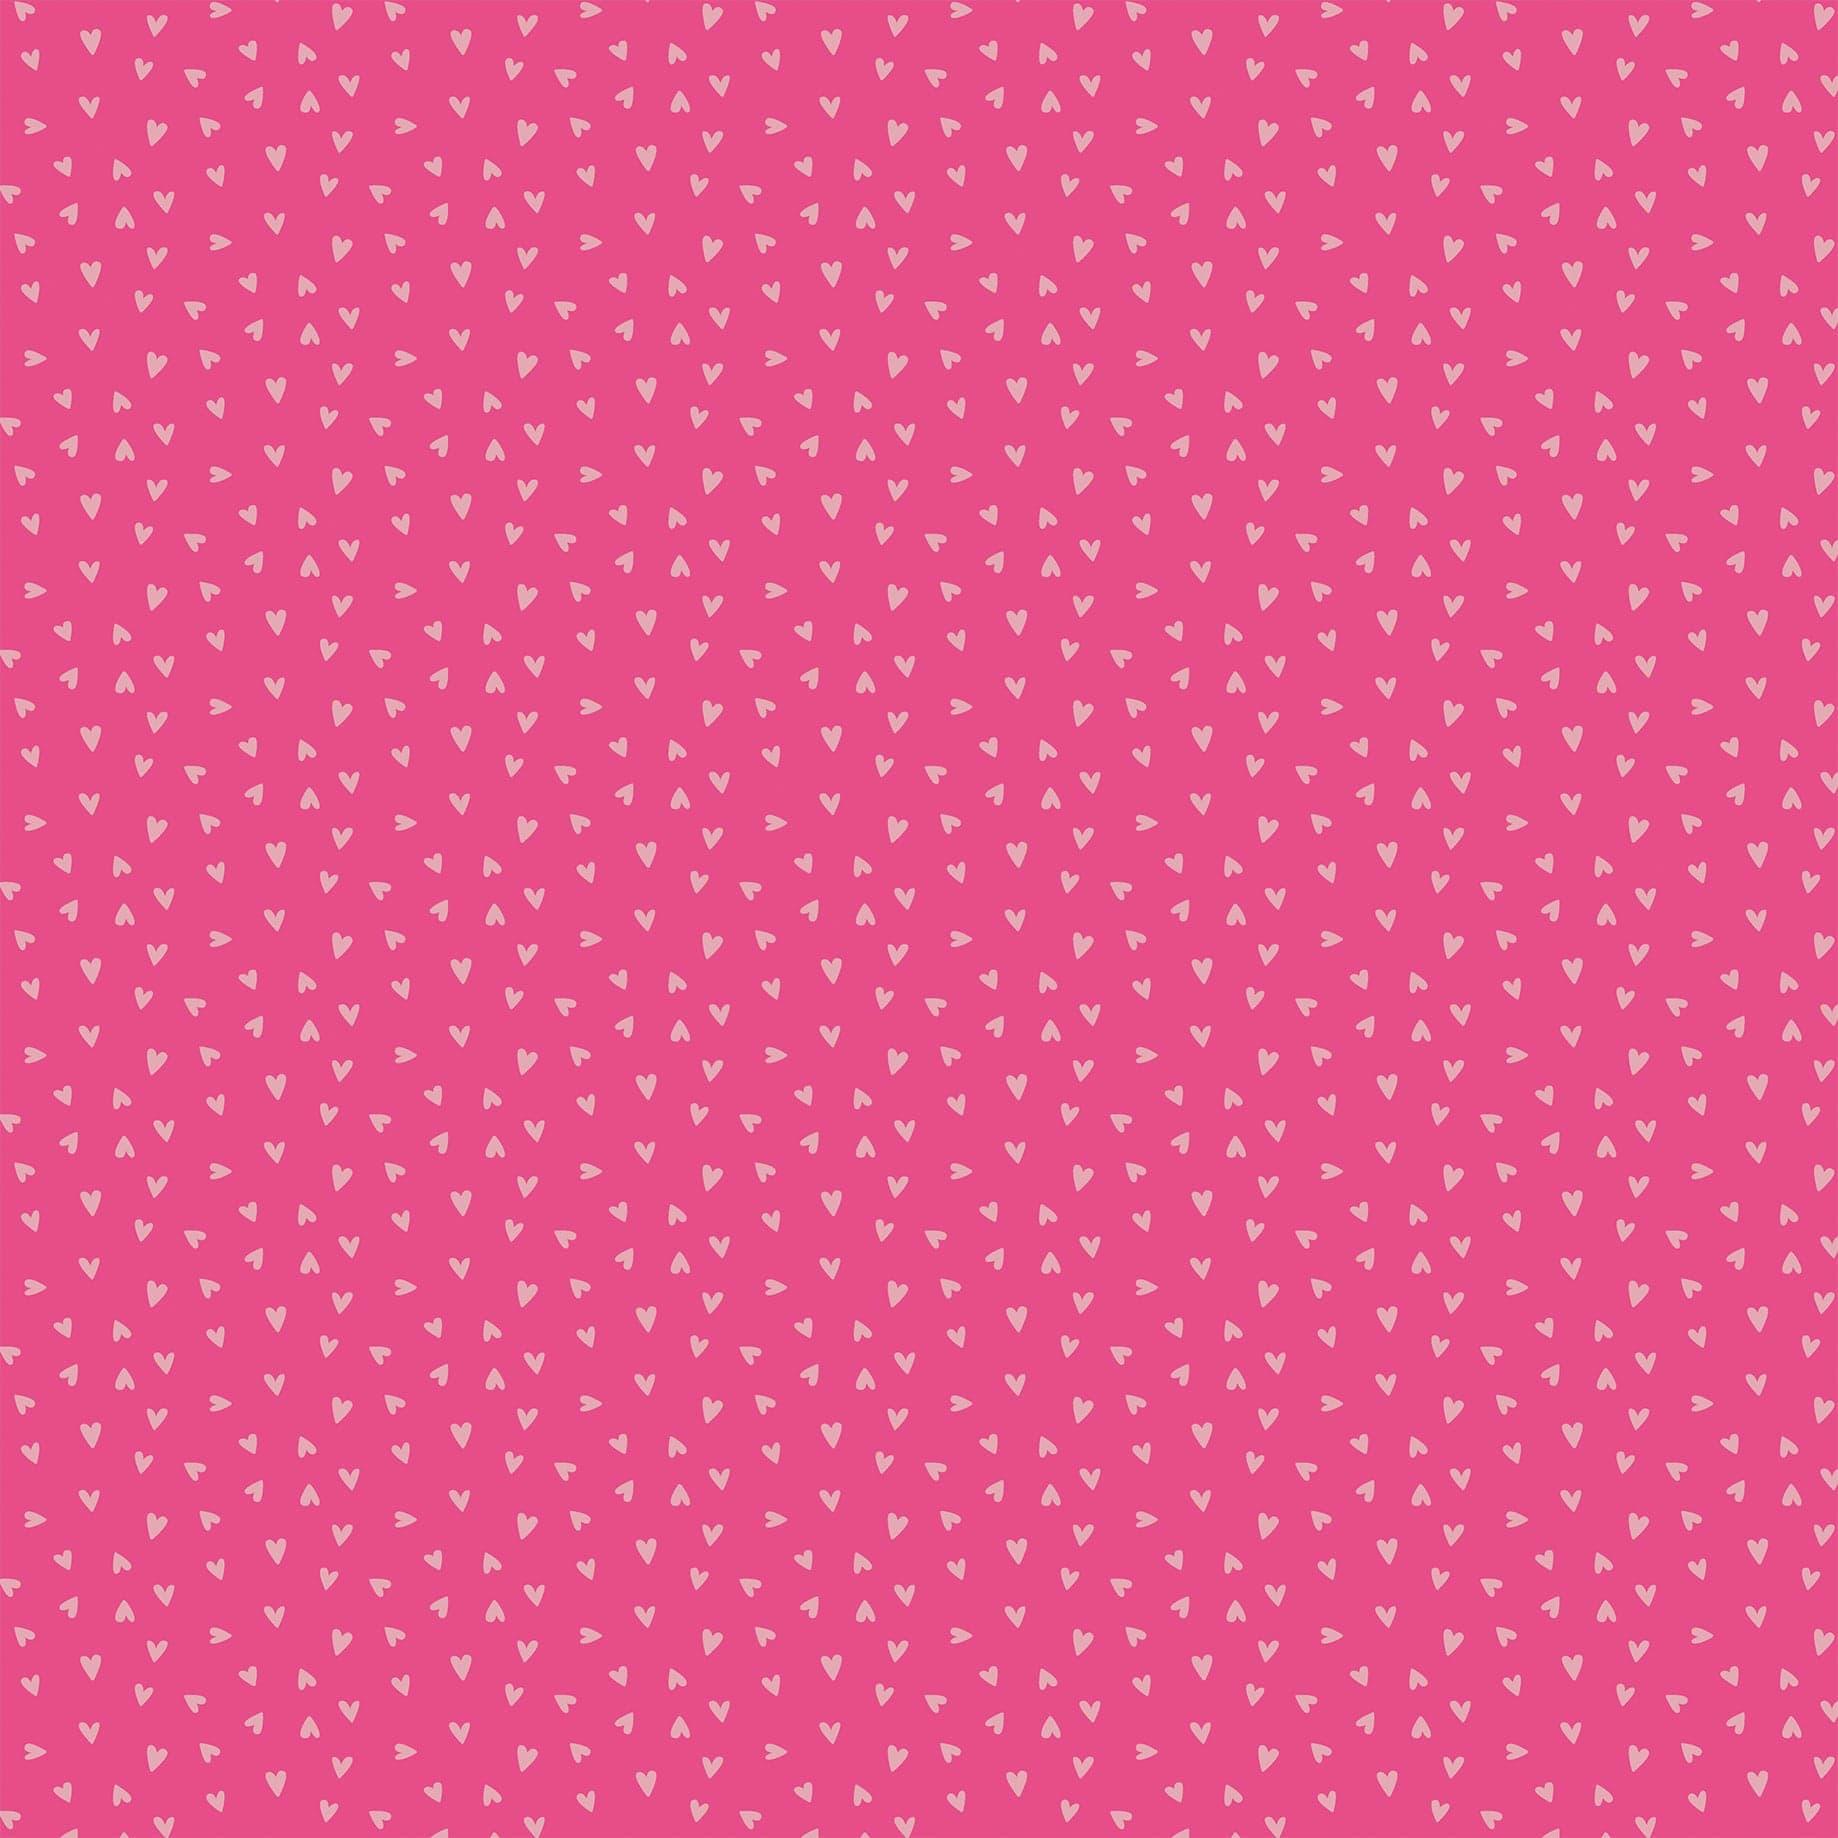 Play All Day Girl Collection Mixed Floral 12 x 12 Double-Sided Scrapbook Paper by Echo Park Paper - Scrapbook Supply Companies